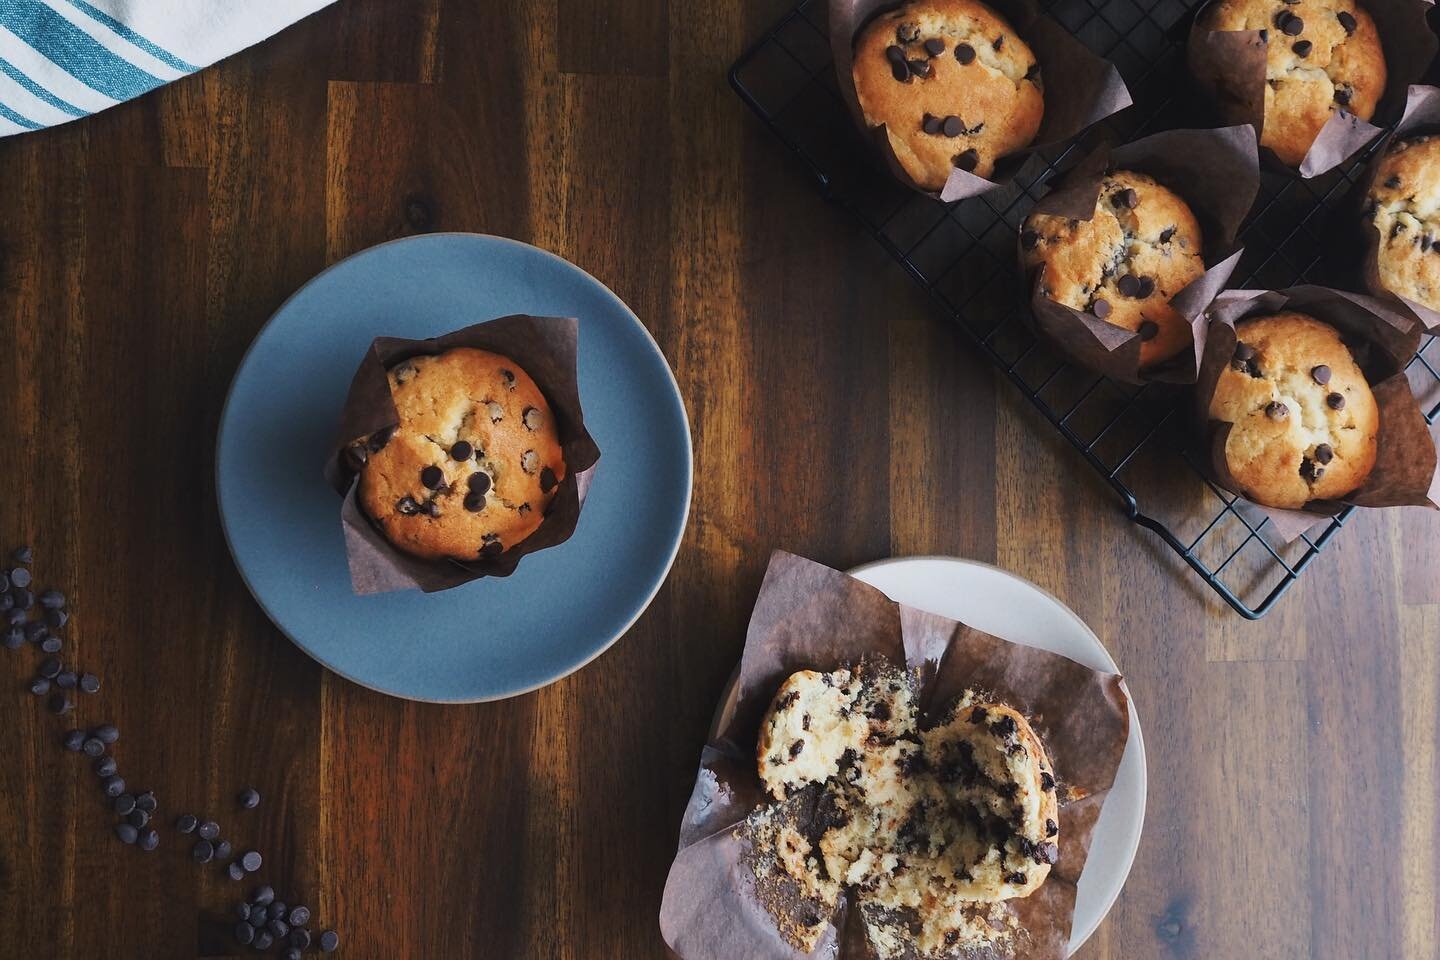 another batch of these! typically not a fan of muffins, but these are literally the best chocolate chip muffins in the world. recipe from @cleobuttera